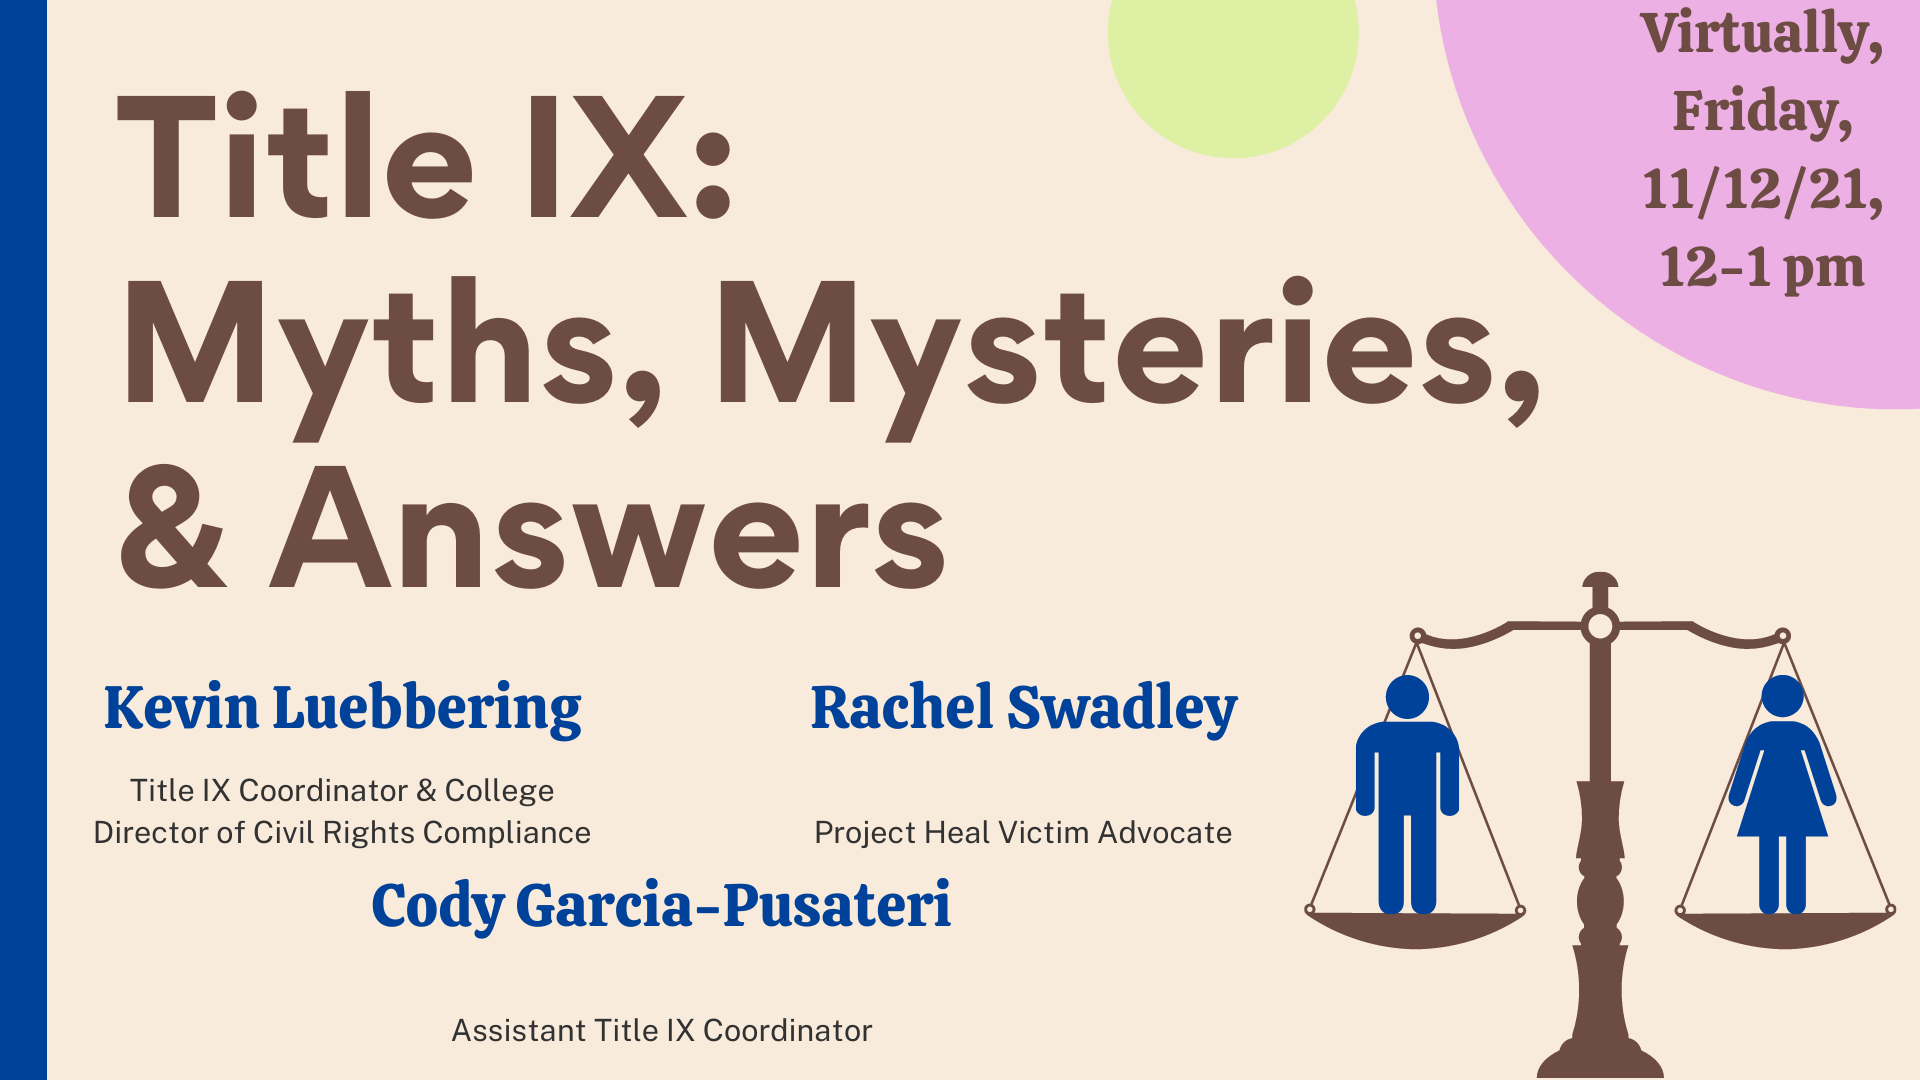 Title IX: Myths, Mysteries, & Answers with Jevin Luebbering, Rachel Swadley, and Cody Garcia-Pusateri